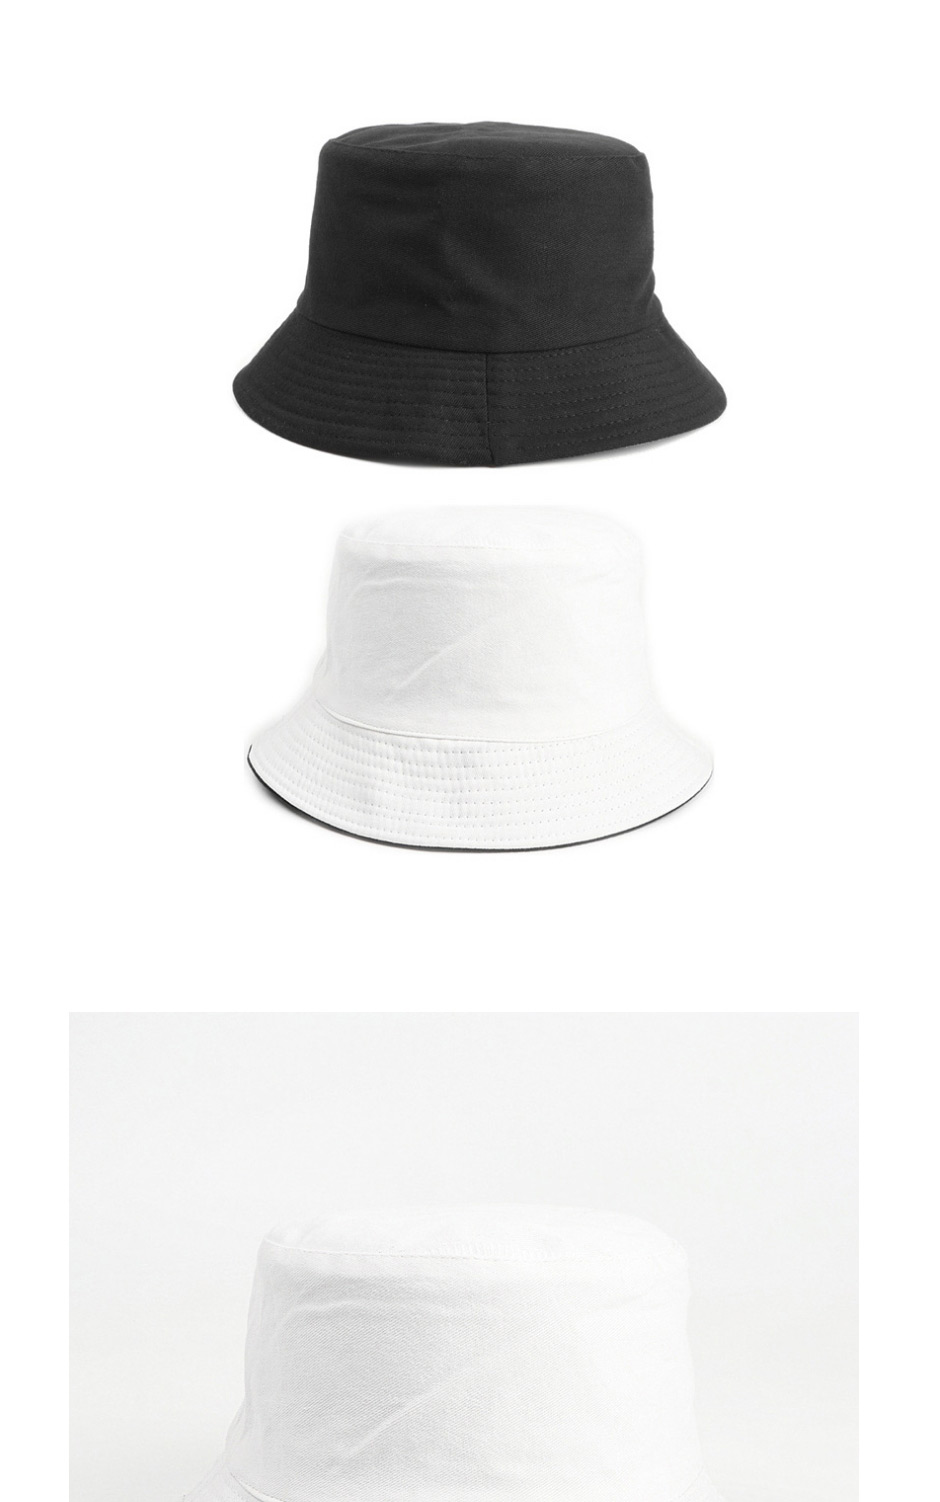 Fashion Light Coffee Black-double-sided Wear Solid Color Double-sided Fisherman Hat,Beanies&Others